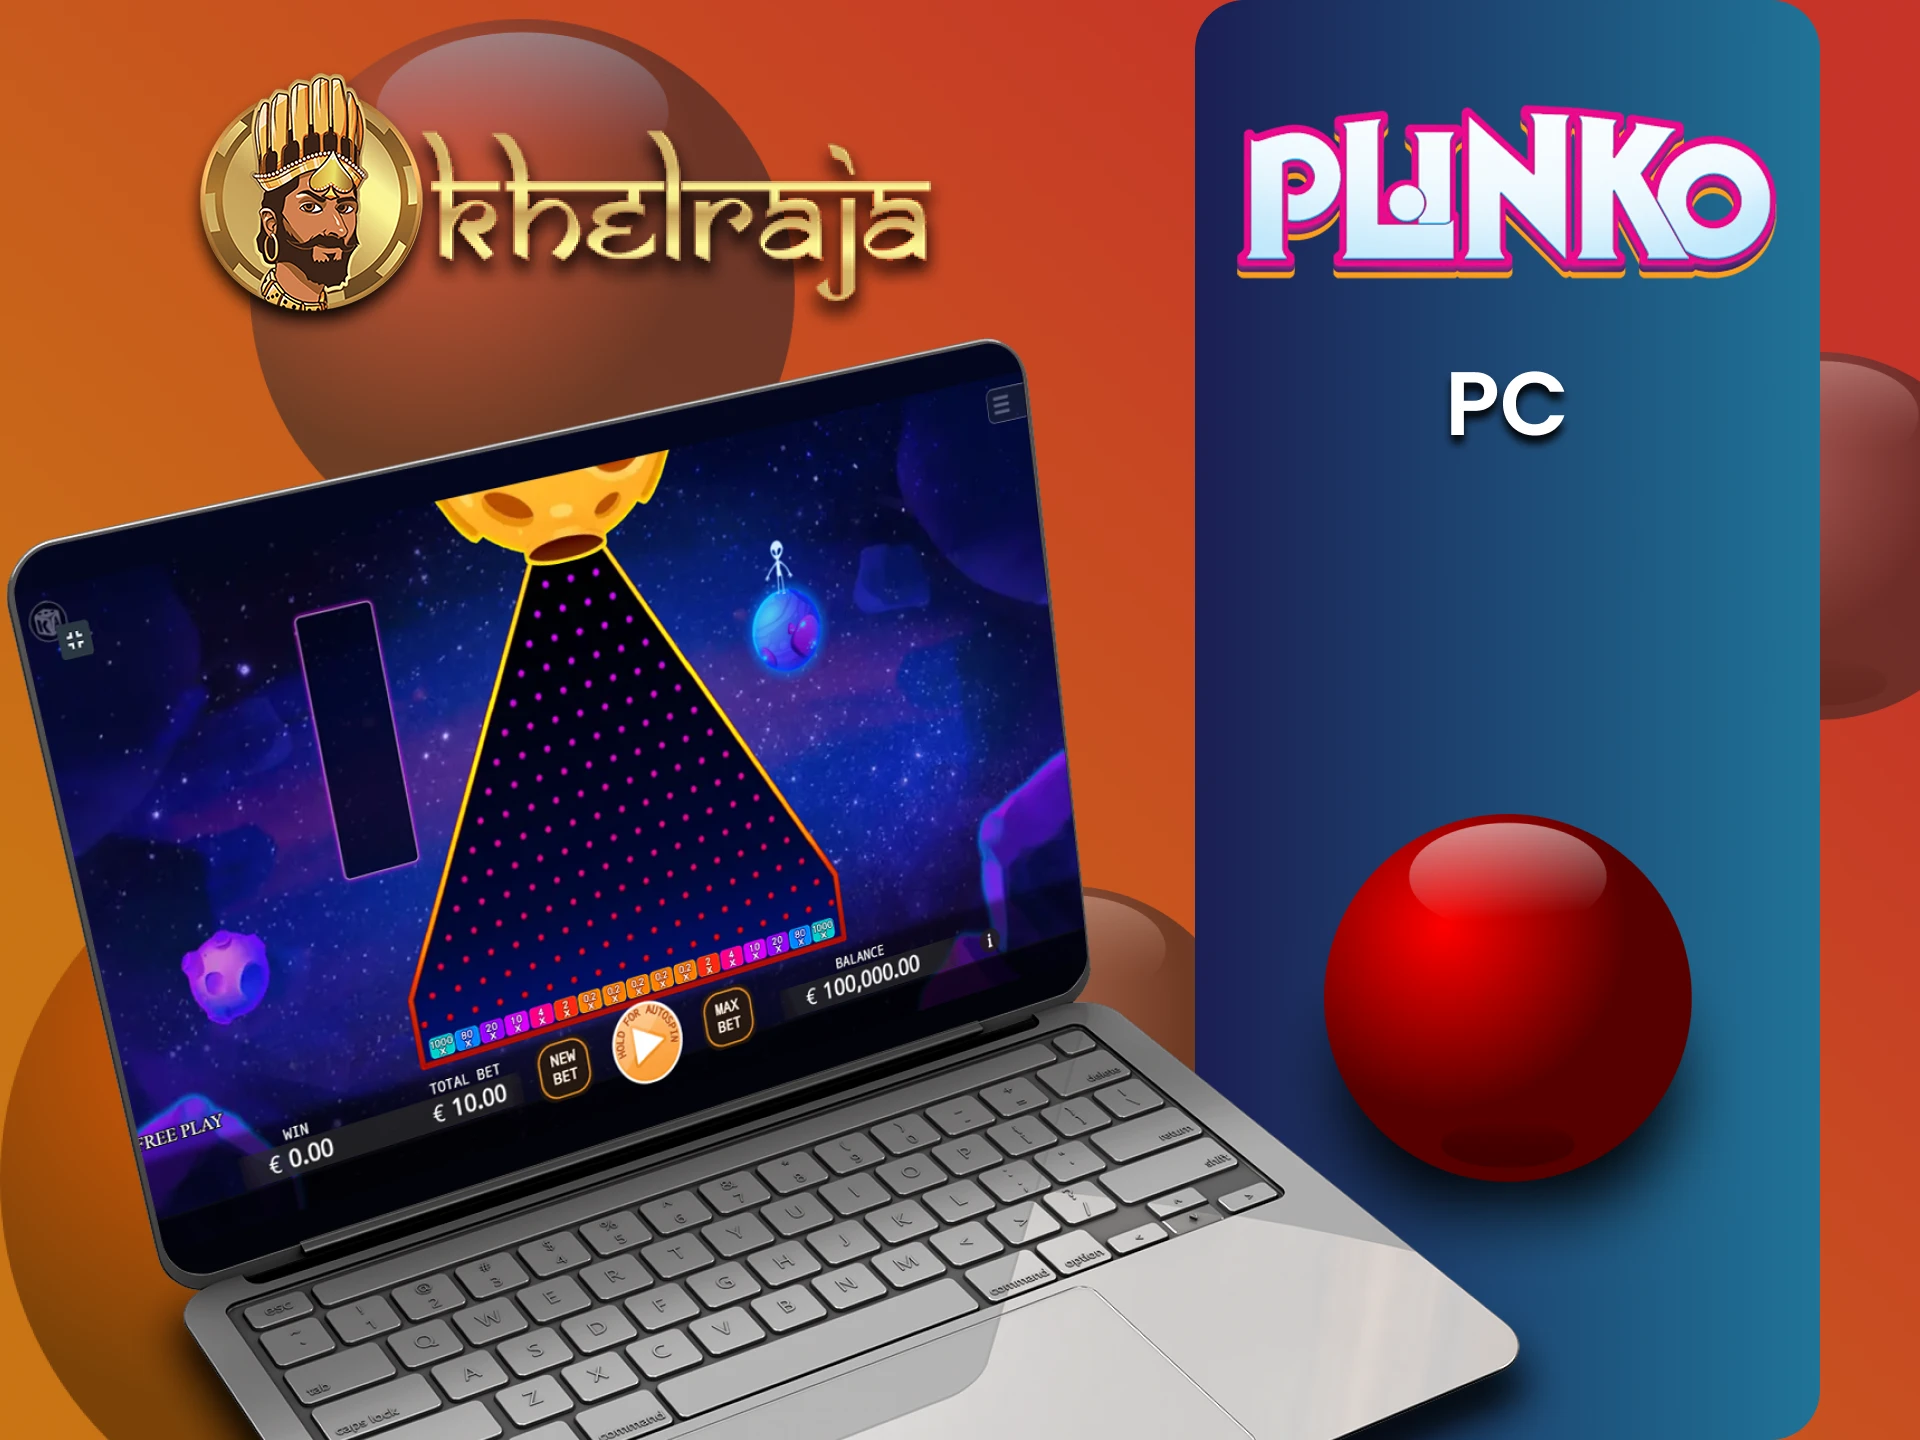 PC is one of the ways to play Plinko on the Khelraja website.